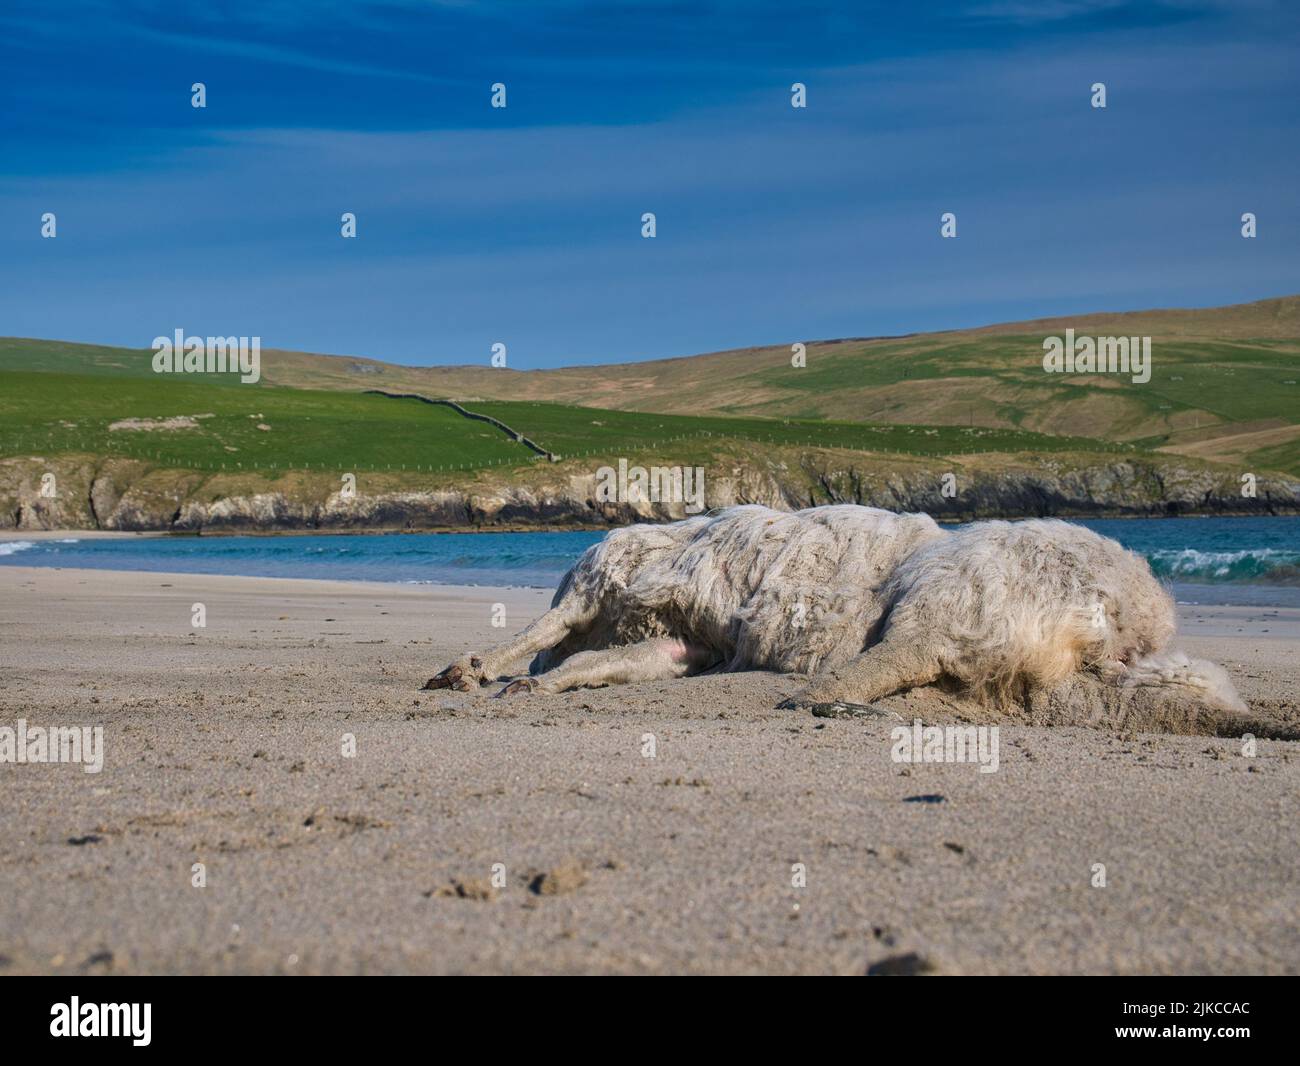 The carcass of a dead sheep washed up on the beach at St Ninian's Isle in Shetland, UK. Taken on a sunny day with a blue sky. Stock Photo